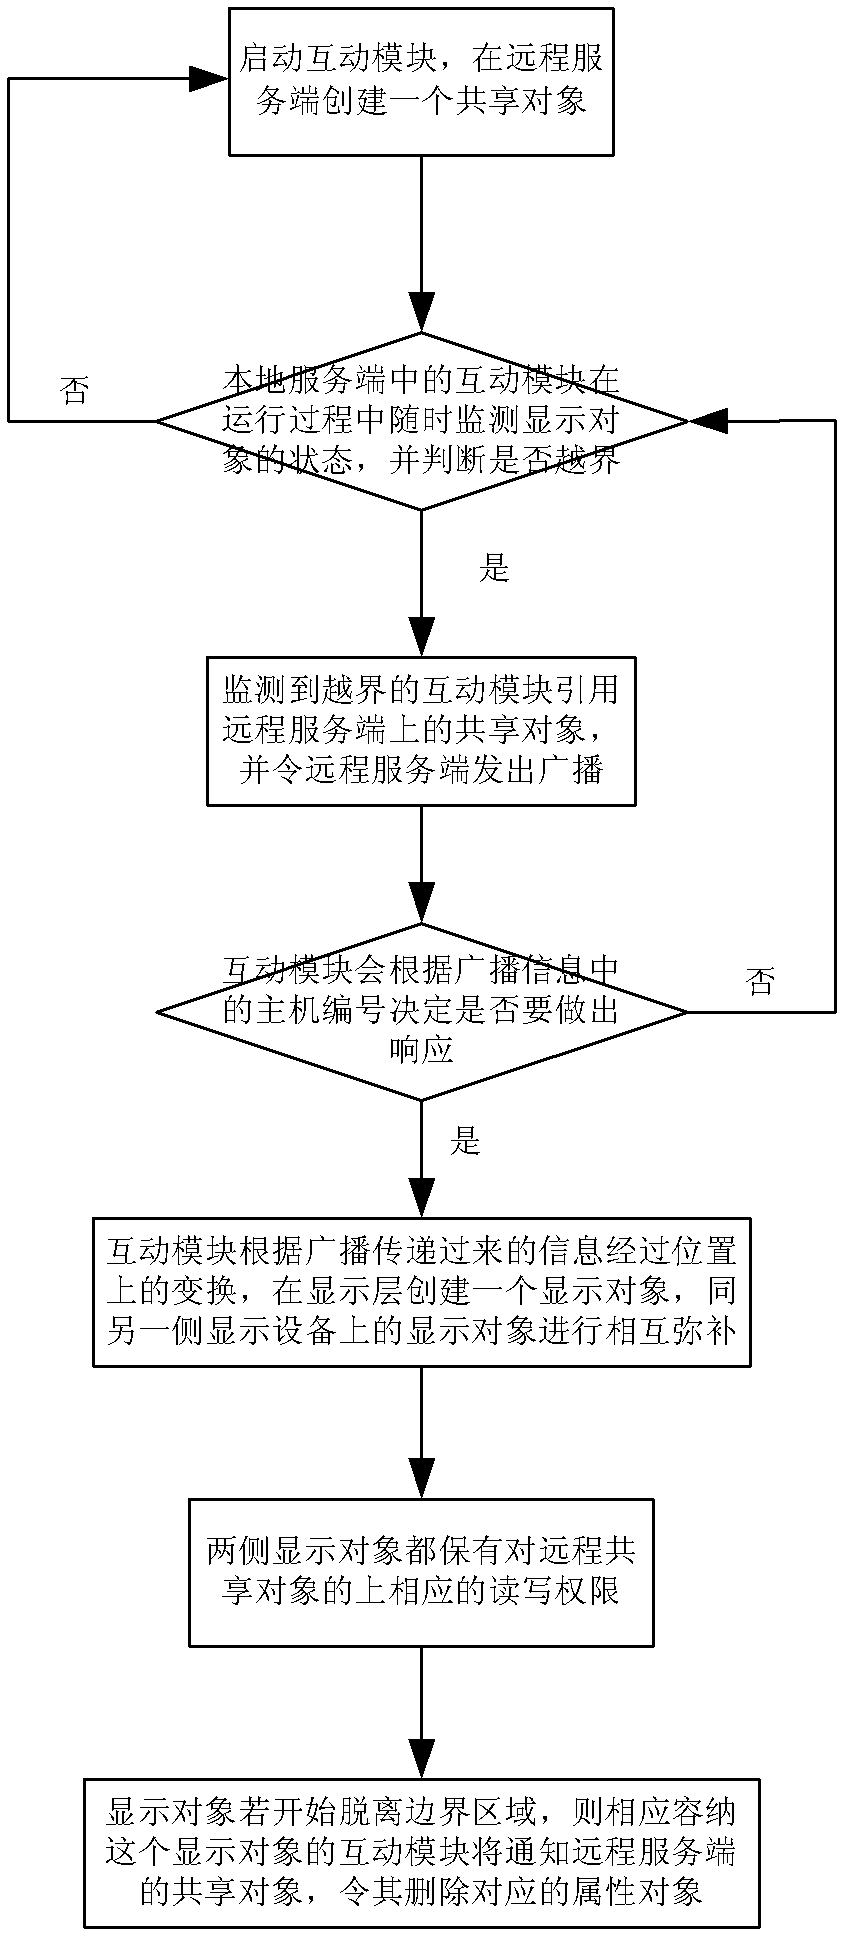 Man-machine interaction information processing method based on large-scale display system